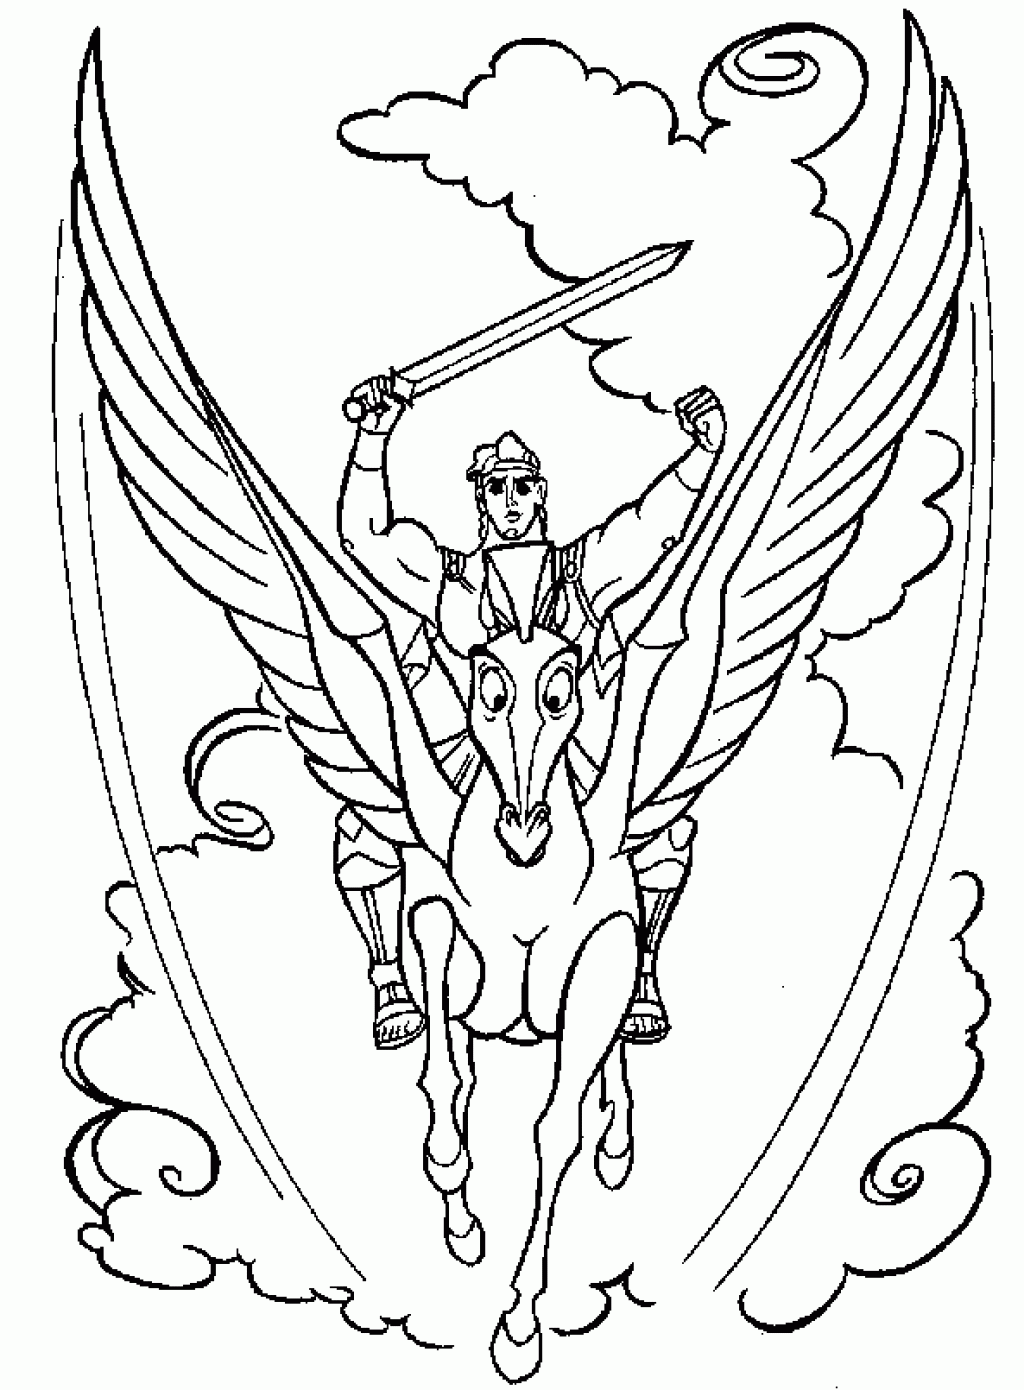 coloring sheets free online free printable volleyball coloring pages for kids coloring sheets online free 